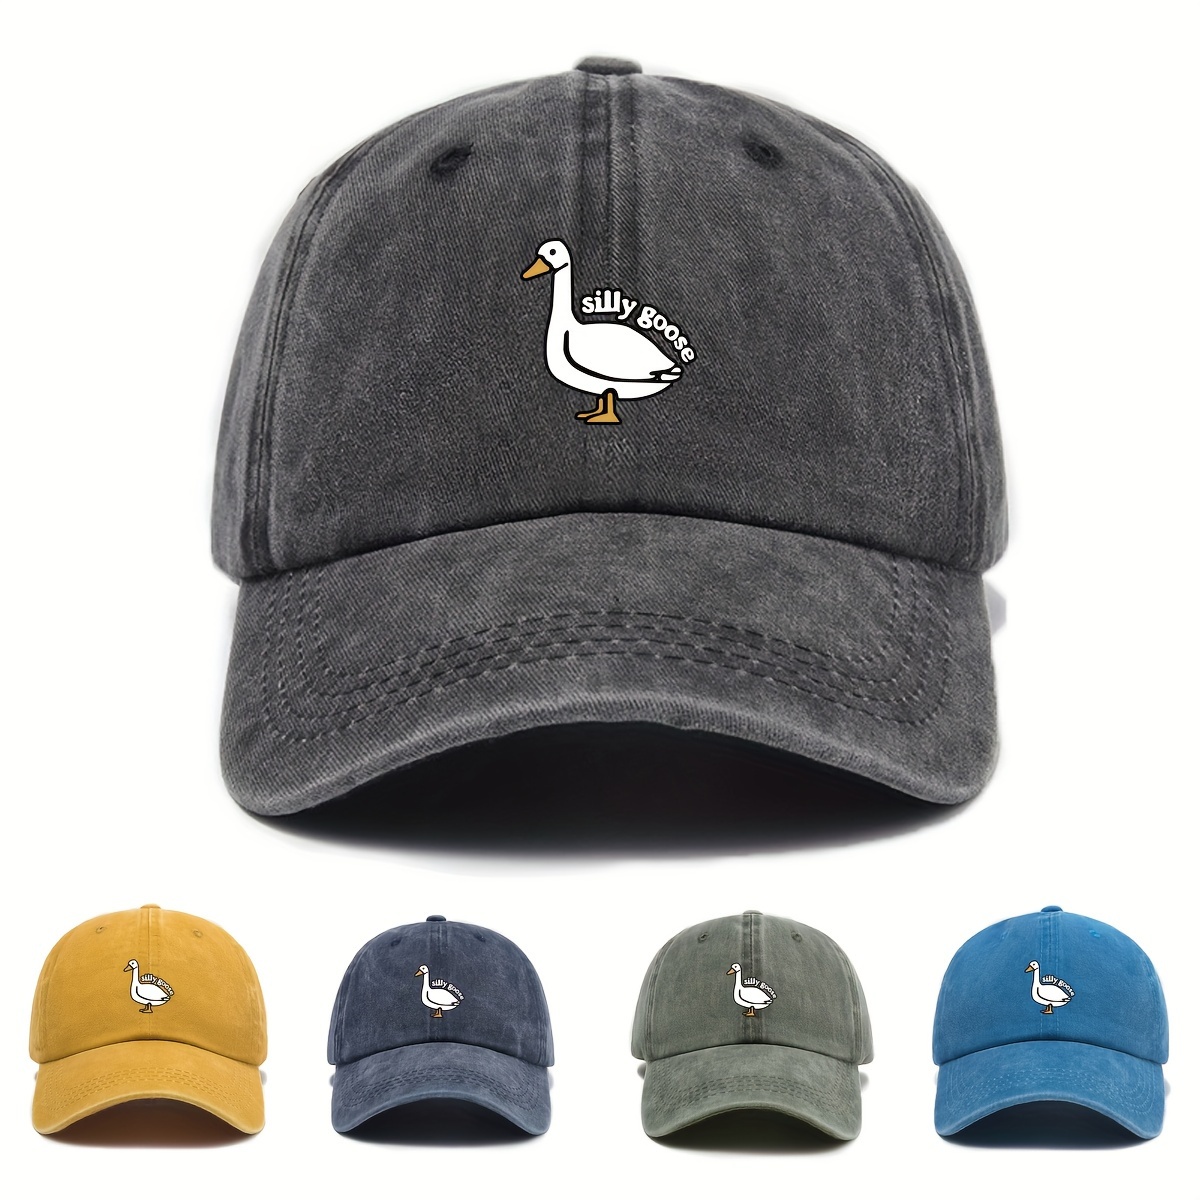 

Unisex Adjustable Baseball Cap With Cute Duck Print - Fashionable Sun Protection, Casual Outdoor Hat For Men & Women Snapback Hats For Men Sun Hat